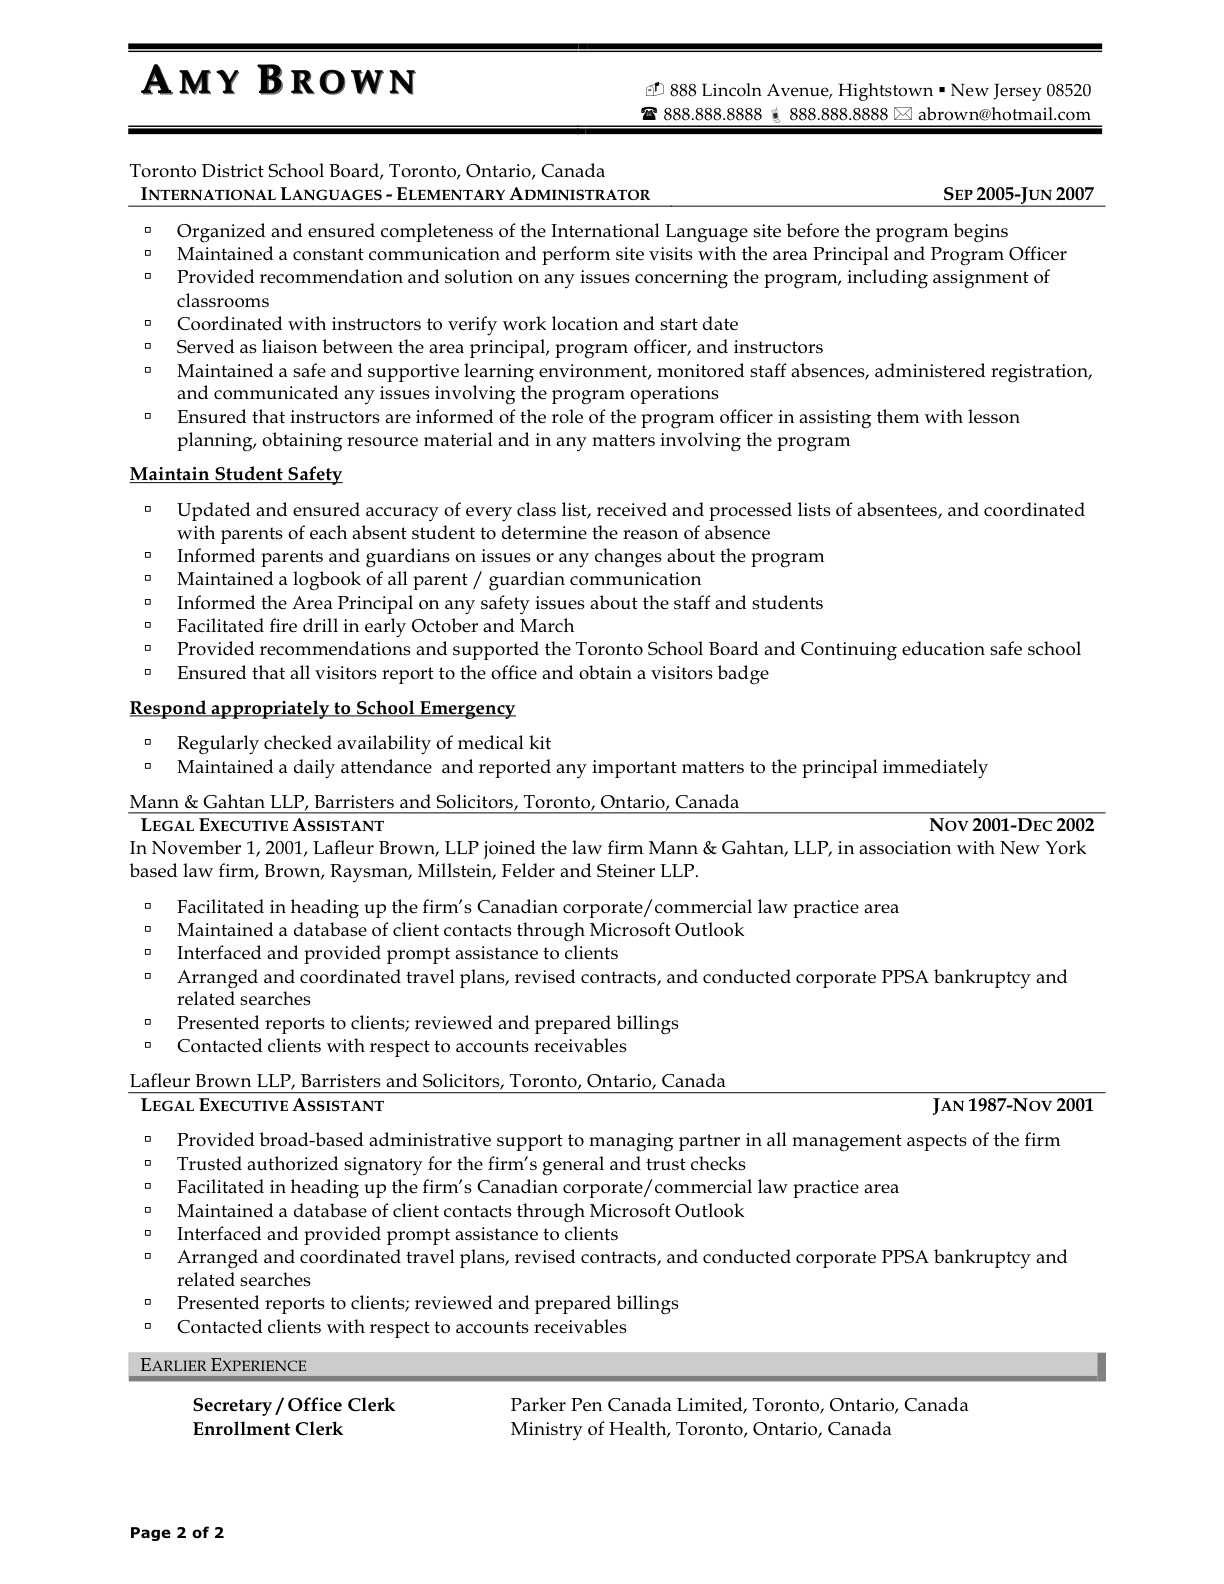 resume for administrative assistant sample administrative assistant